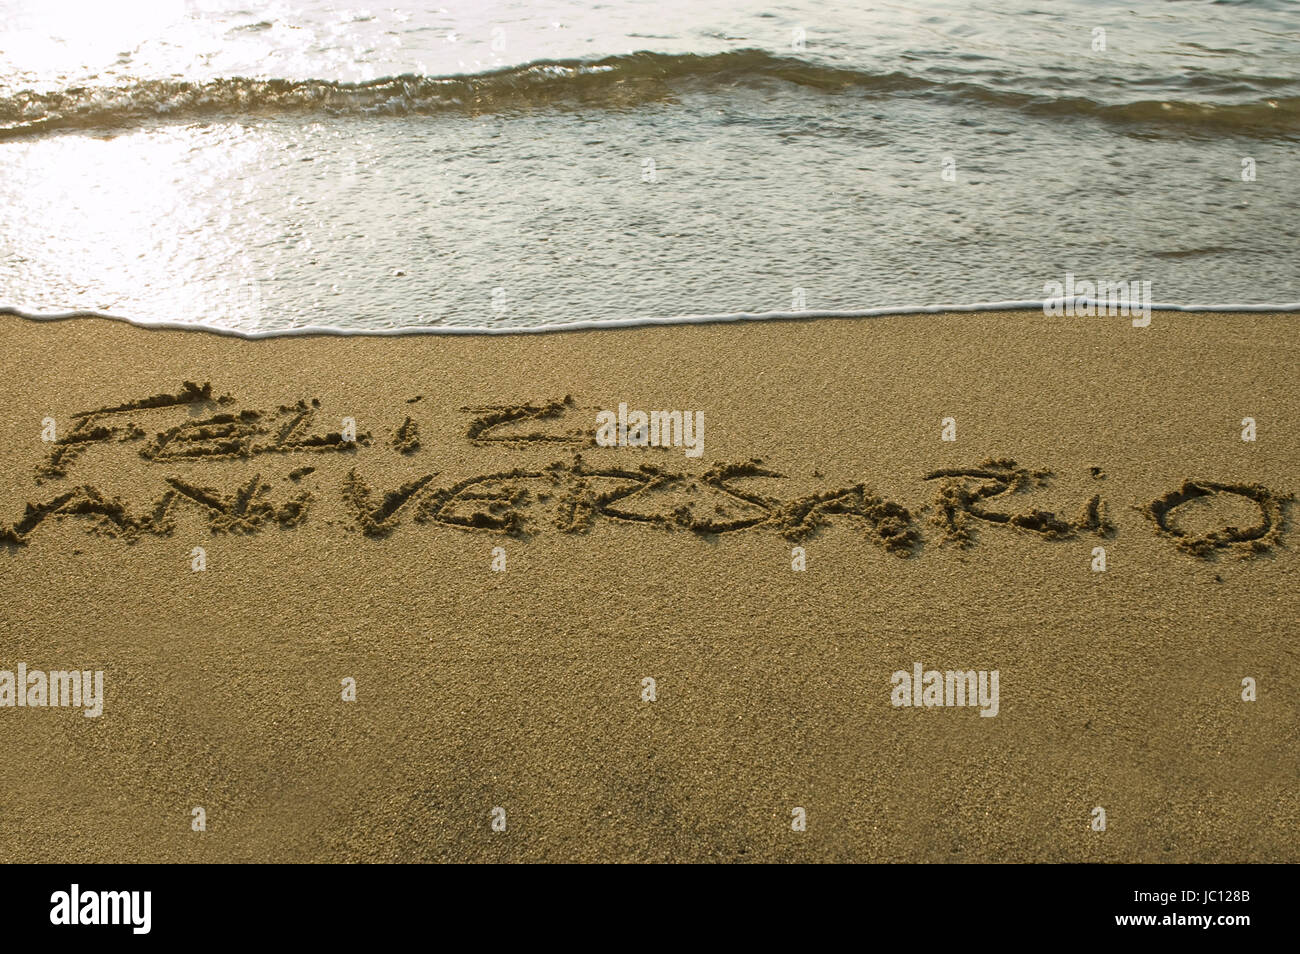 cogratulation sentence on the sand of a beach Stock Photo